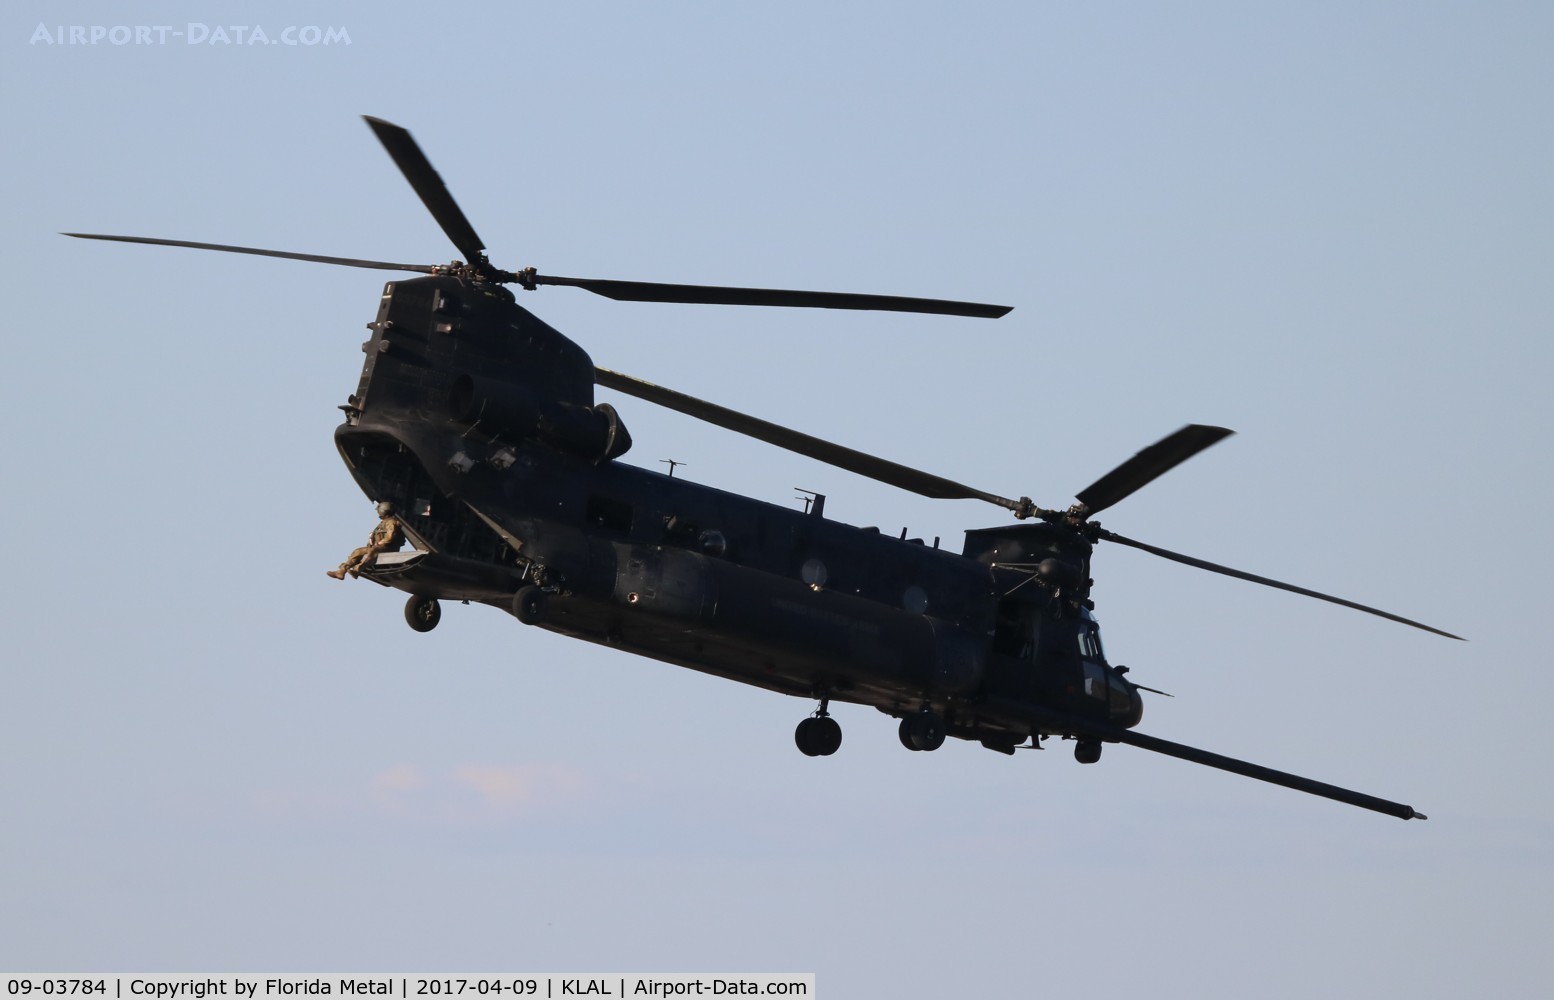 09-03784, 2009 Boeing MH-47G Chinook C/N M3784, MH-47G